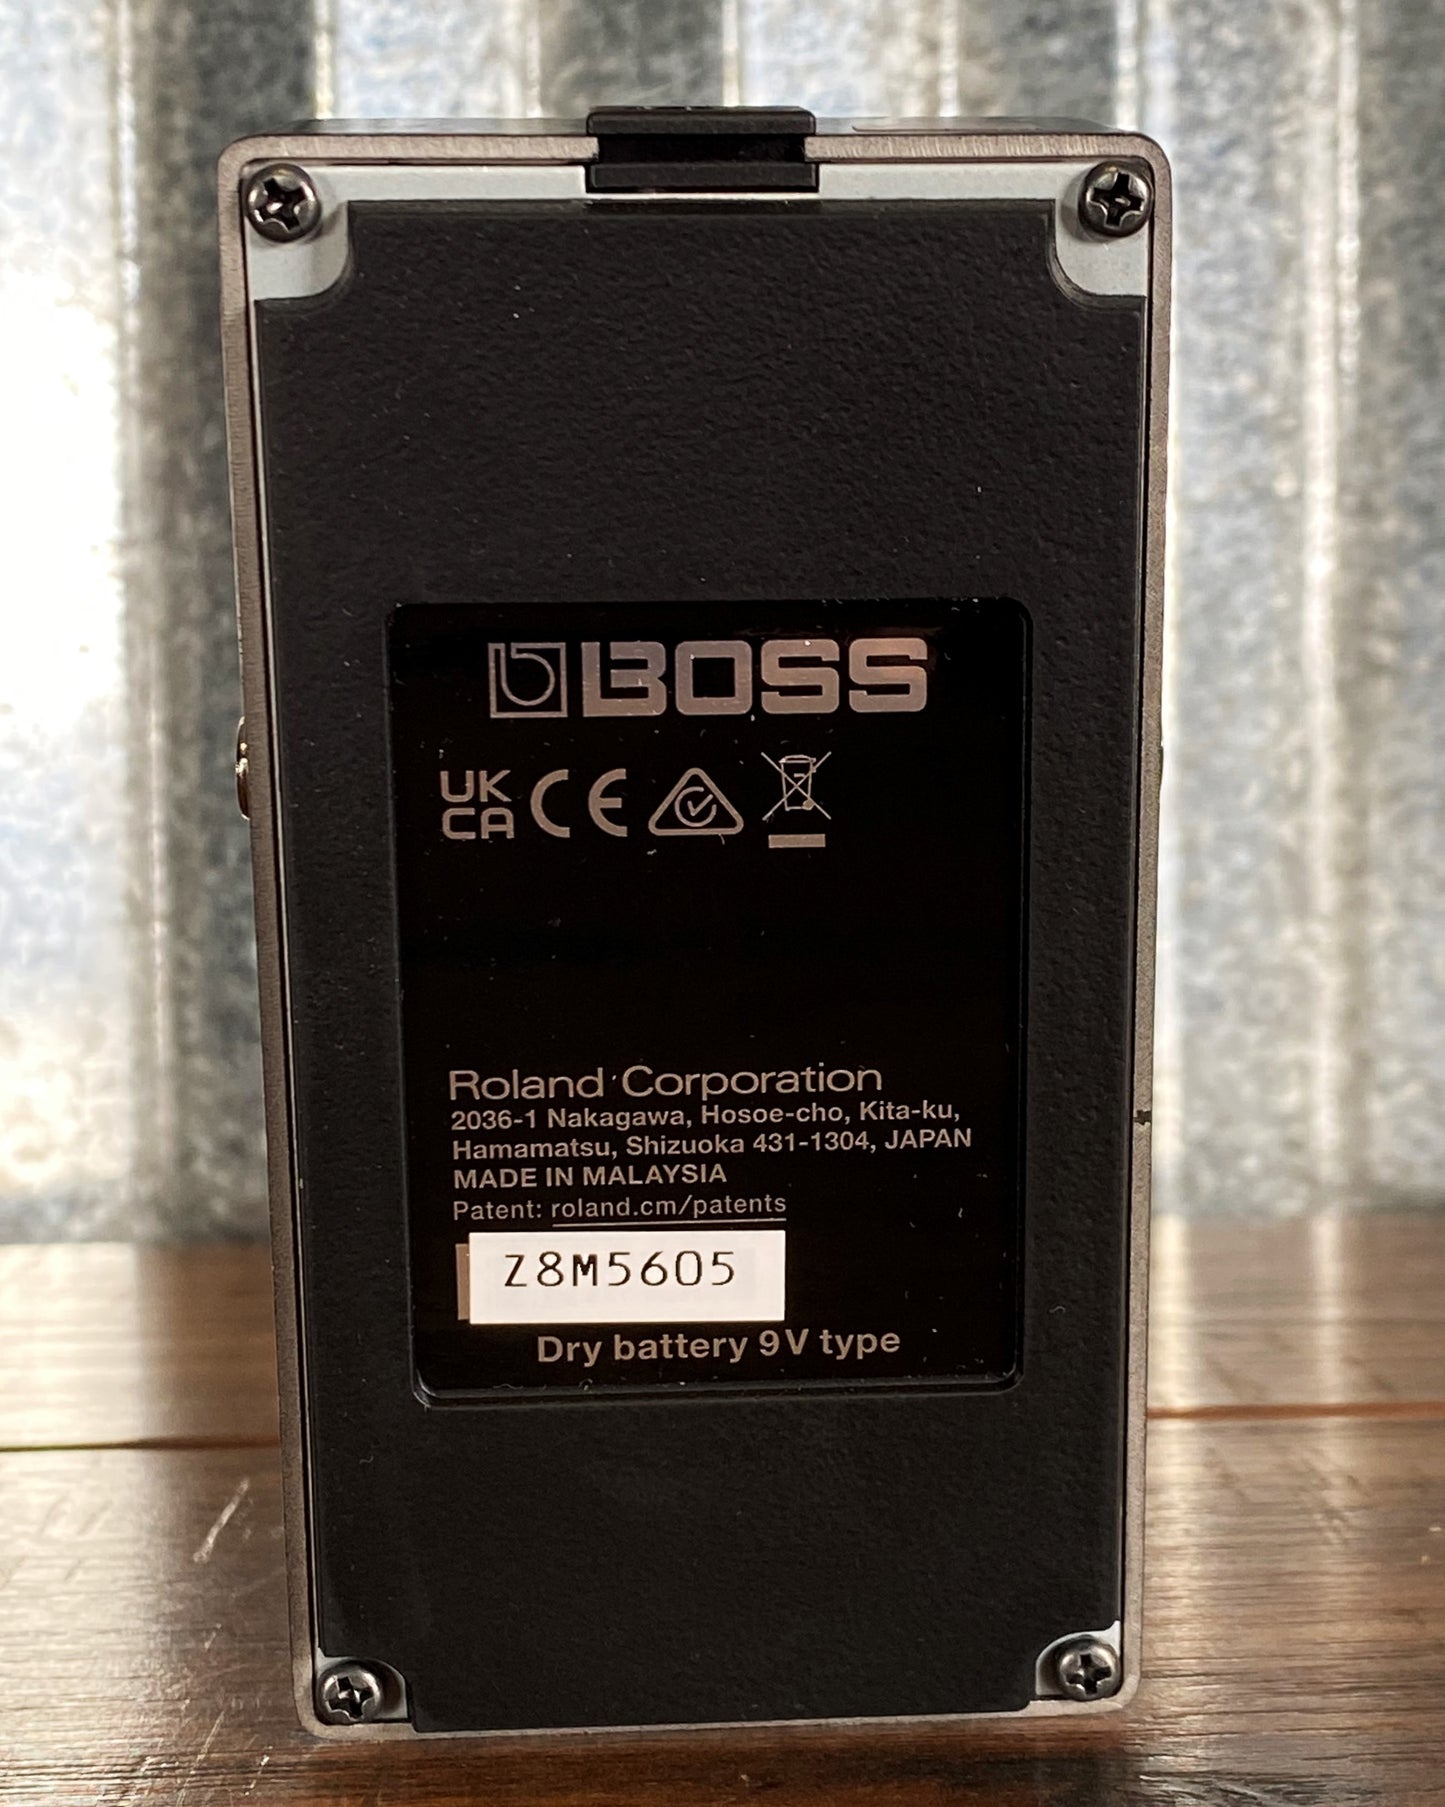 Boss MT-2 Metal Zone Limited Edition 30th Anniversary Guitar Distortion Effect Pedal